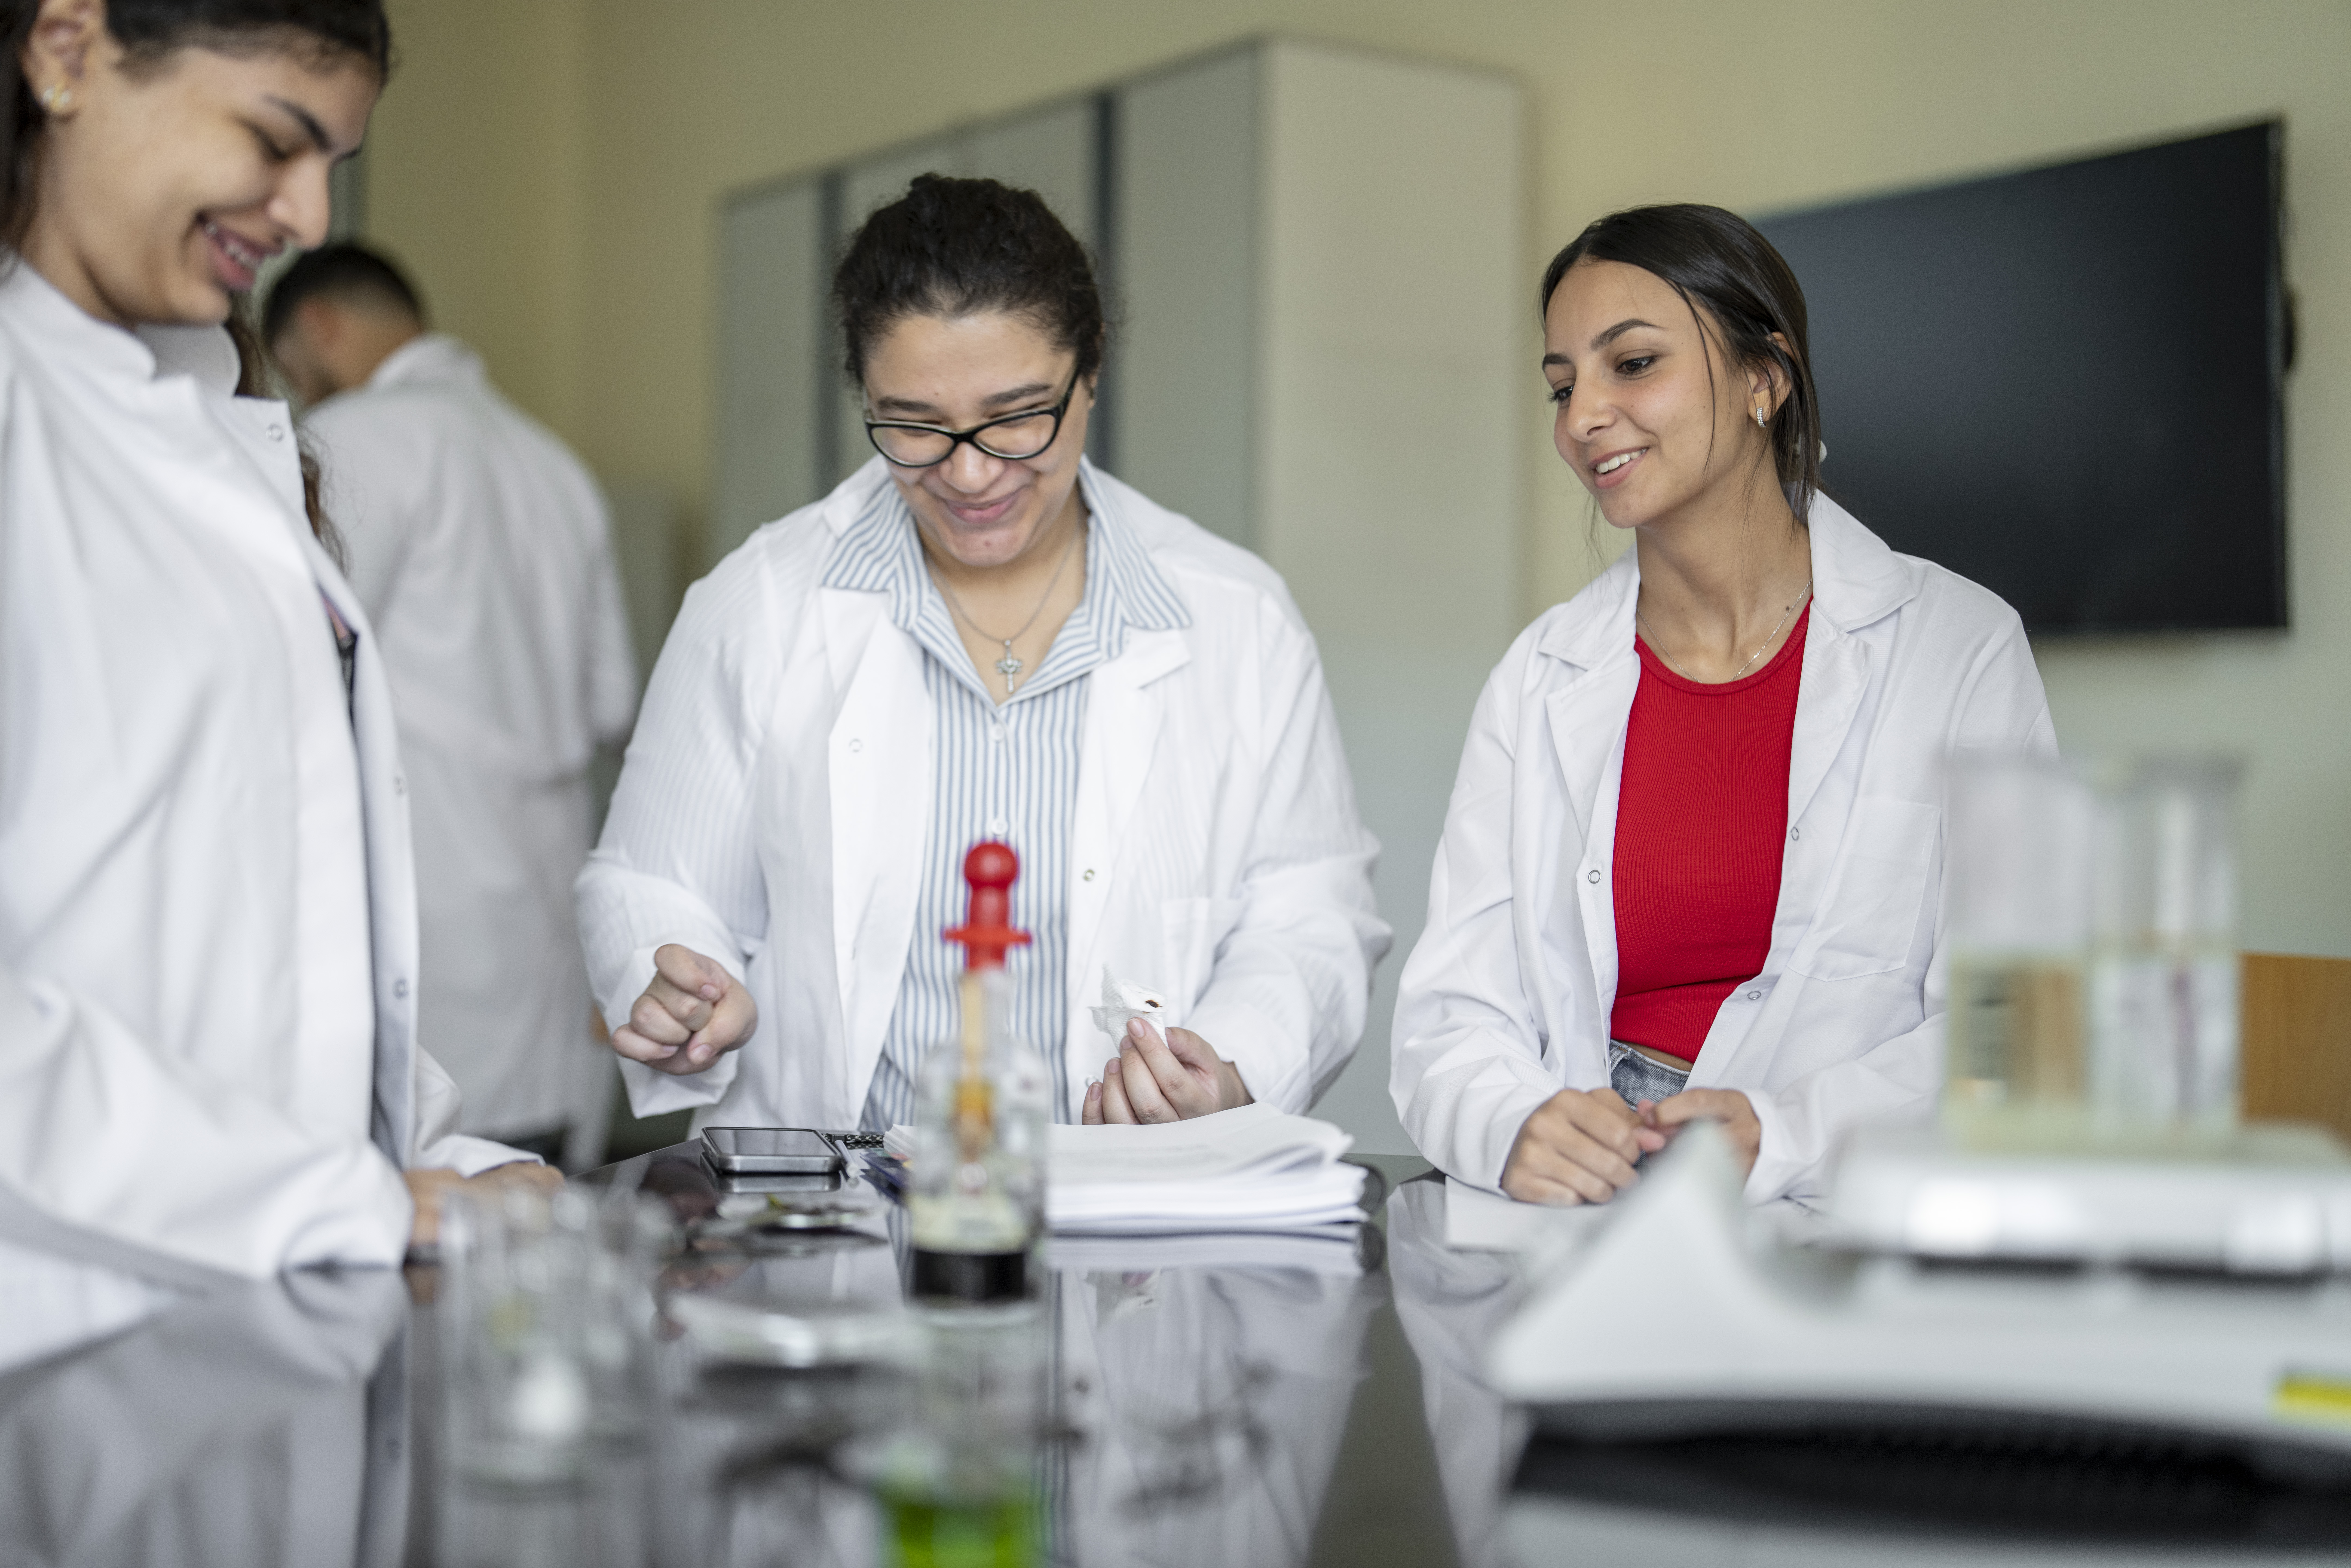 group of students in lab working on chemicals wearing white coats